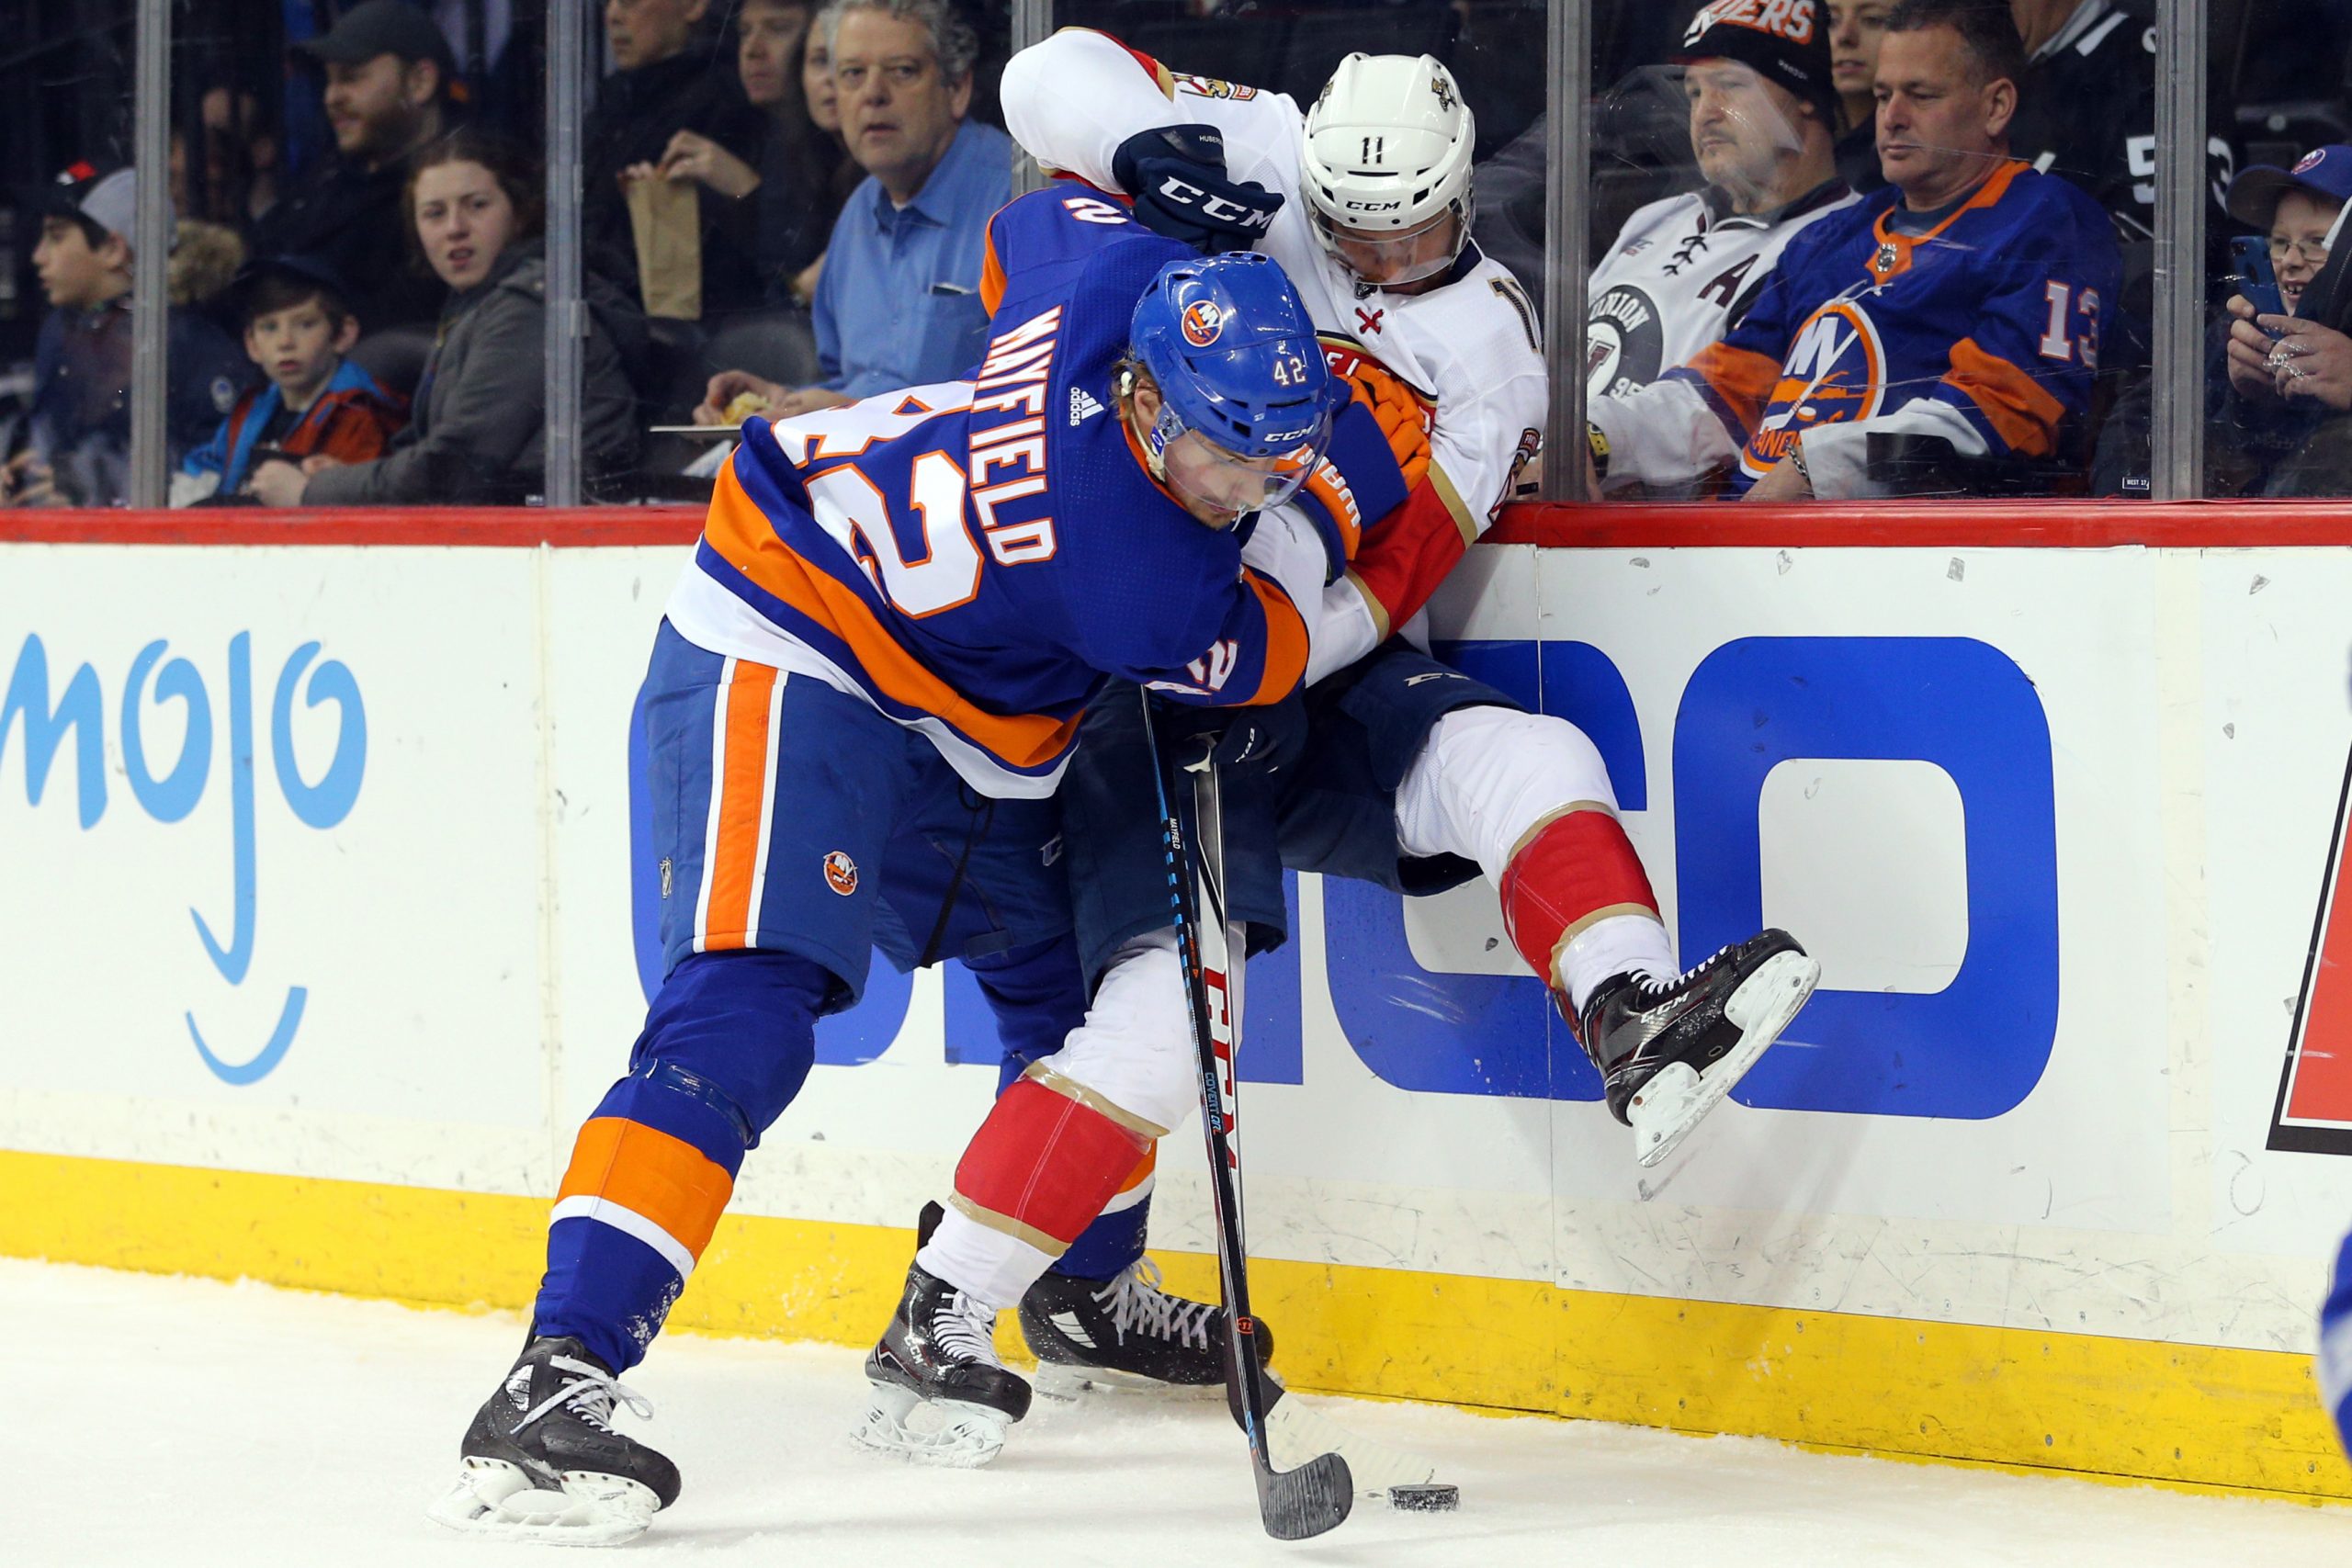 Jan 30, 2018; Brooklyn, NY, USA; New York Islanders defenseman Scott Mayfield (42) hits Florida Panthers center Jonathan Huberdeau (11) as they fight for the puck during the first period at Barclays Center. Mandatory Credit: Brad Penner-USA TODAY Sports